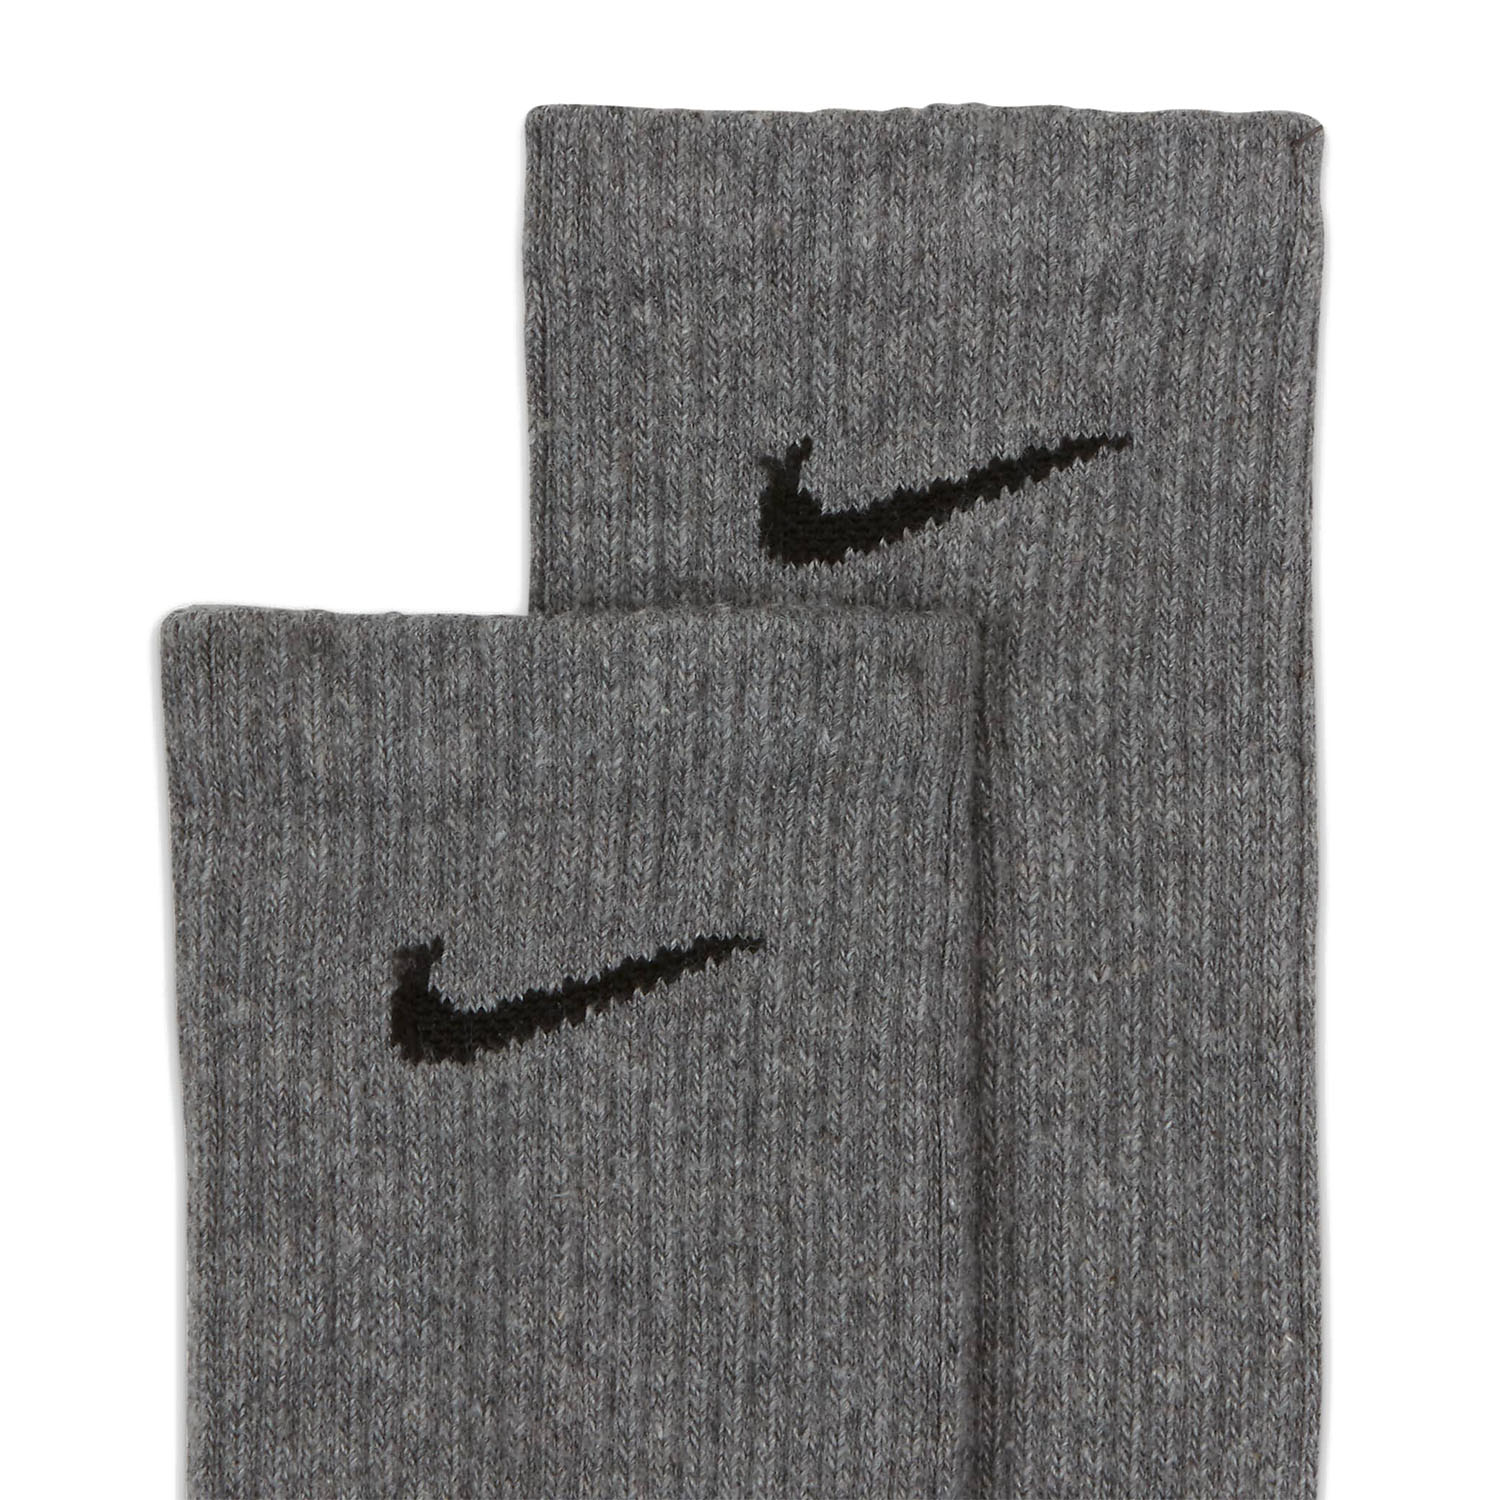 Nike Everyday Plus Cushioned x 6 Calze - Carbon Heather/Black